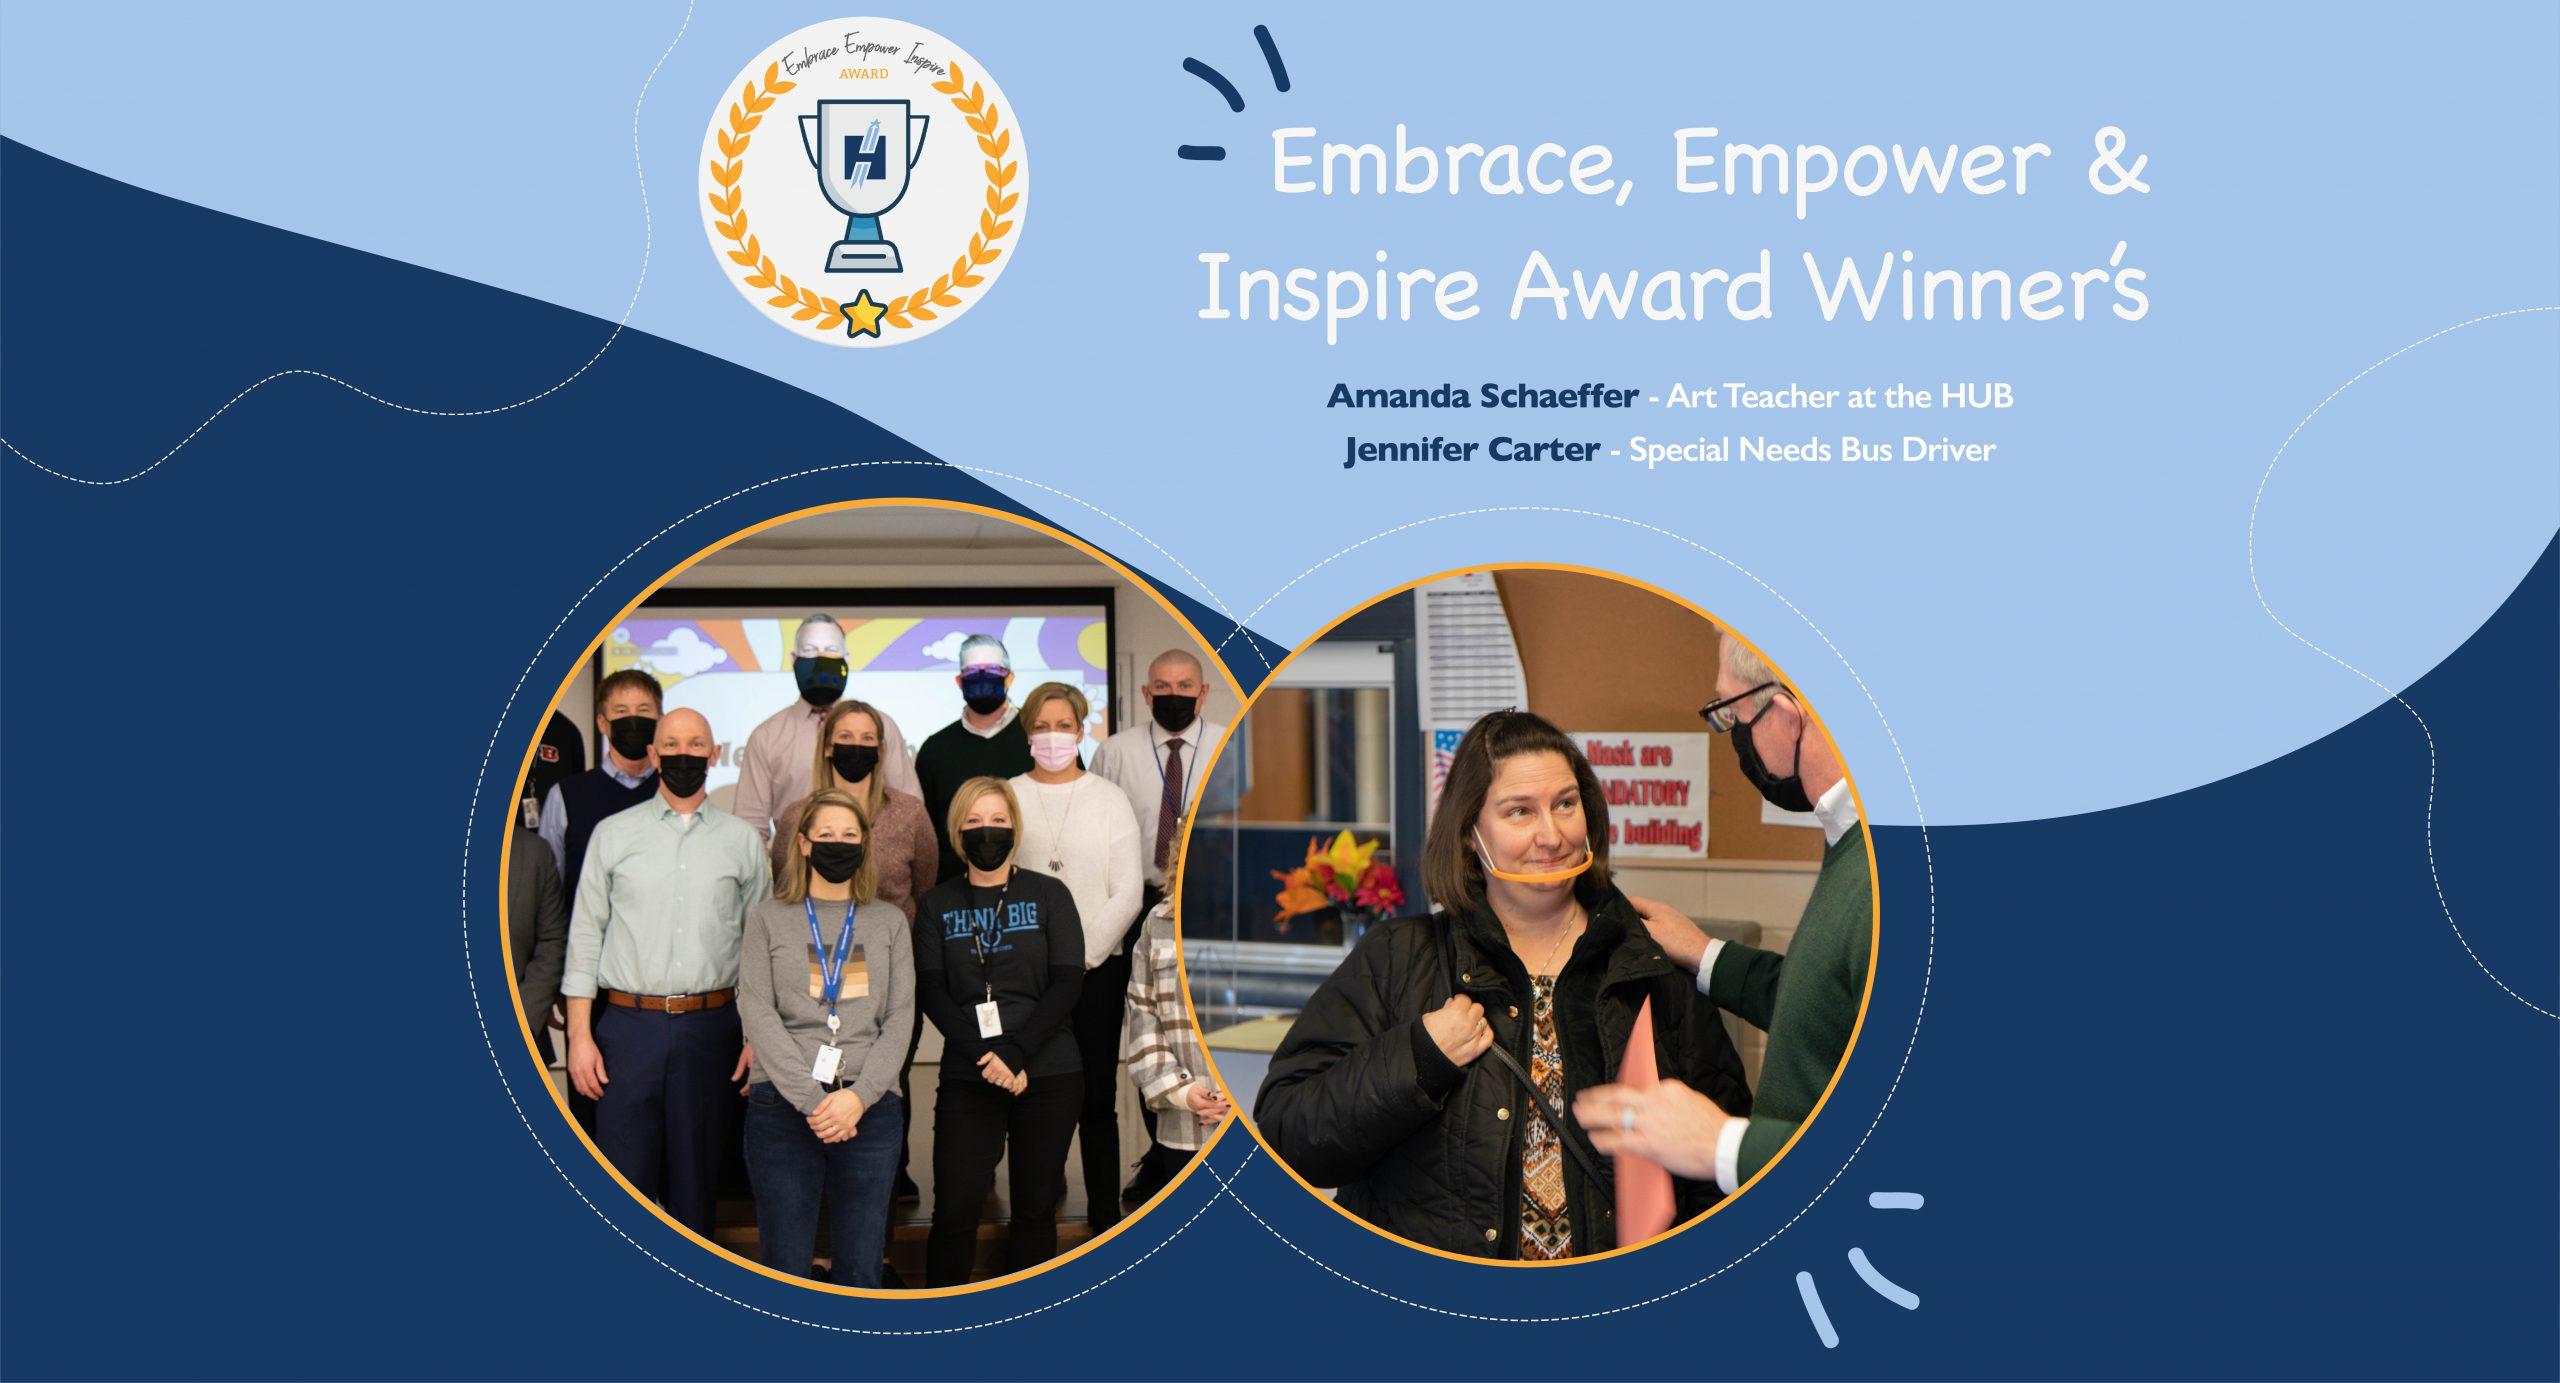 Winners of the Embrace, Empower & Inspire Award